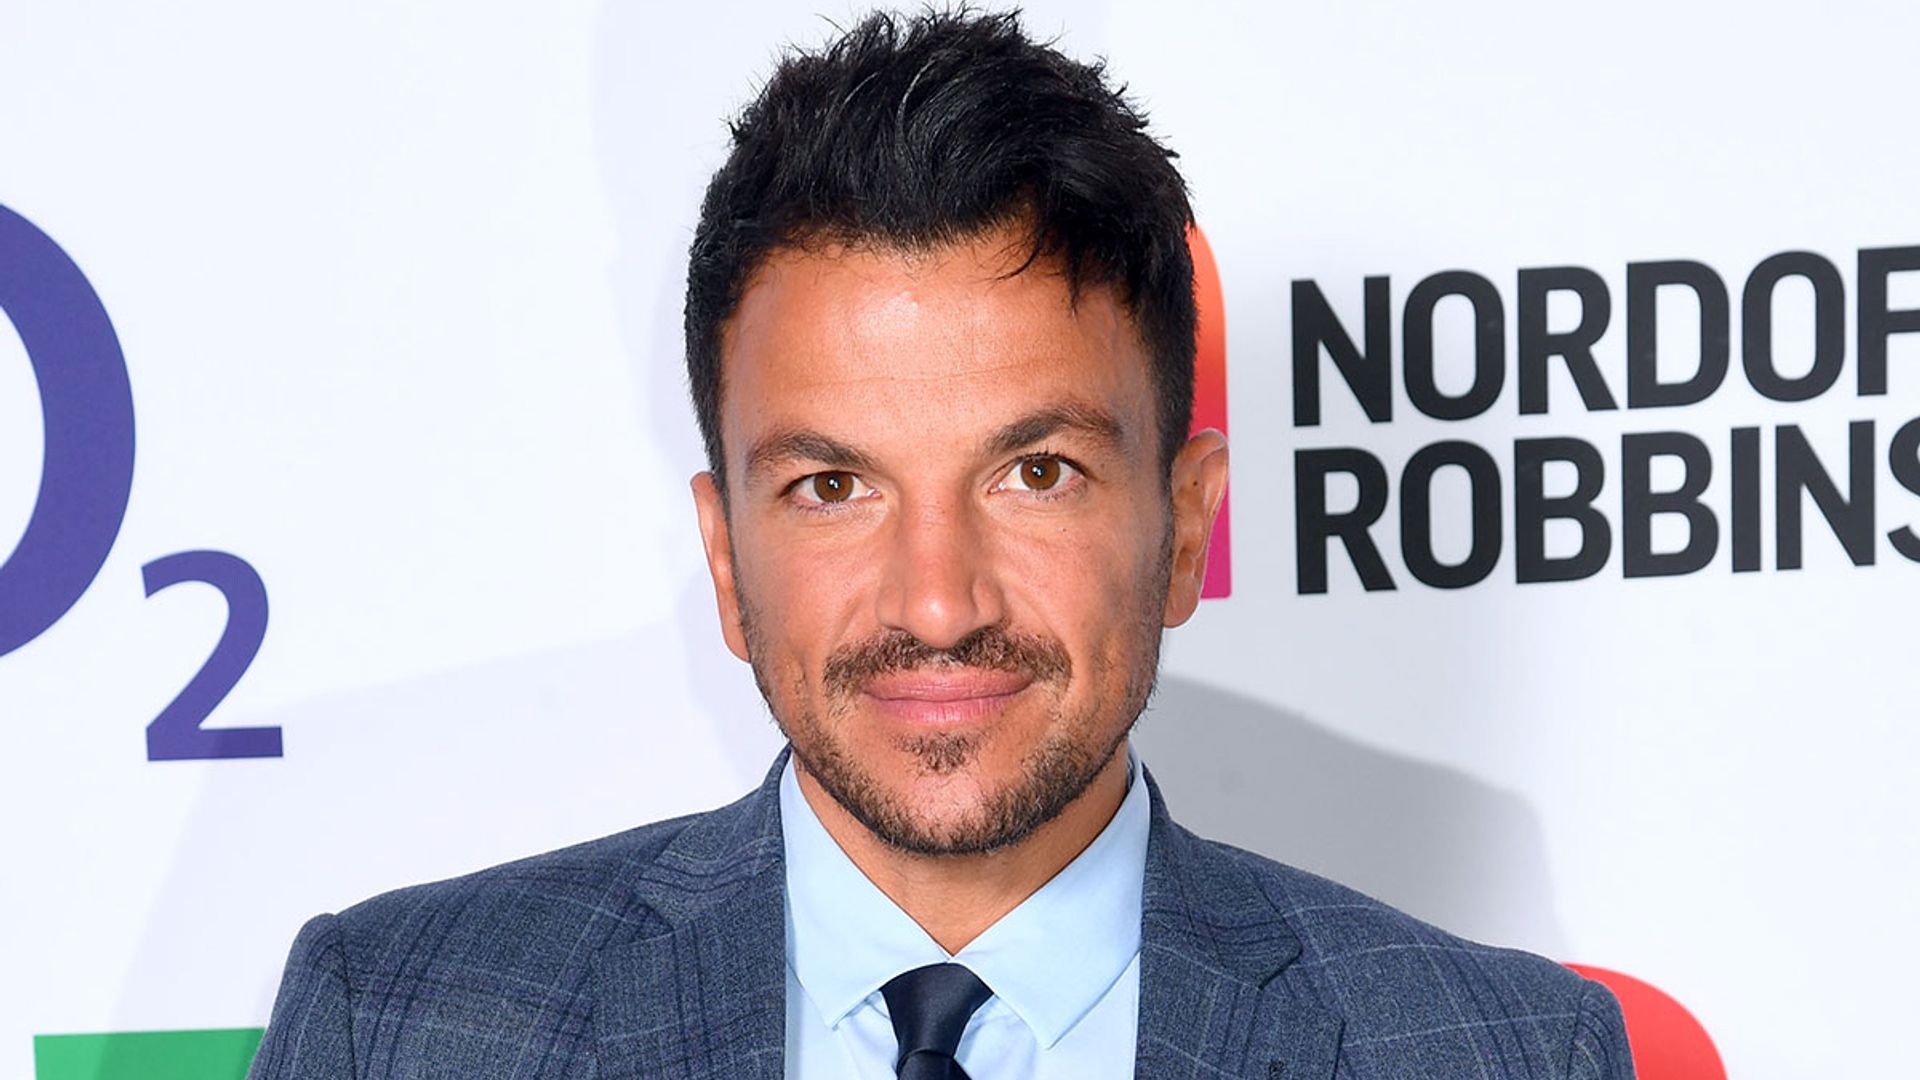 Peter Andre reveals surprising connection to Friends star David Schwimmer